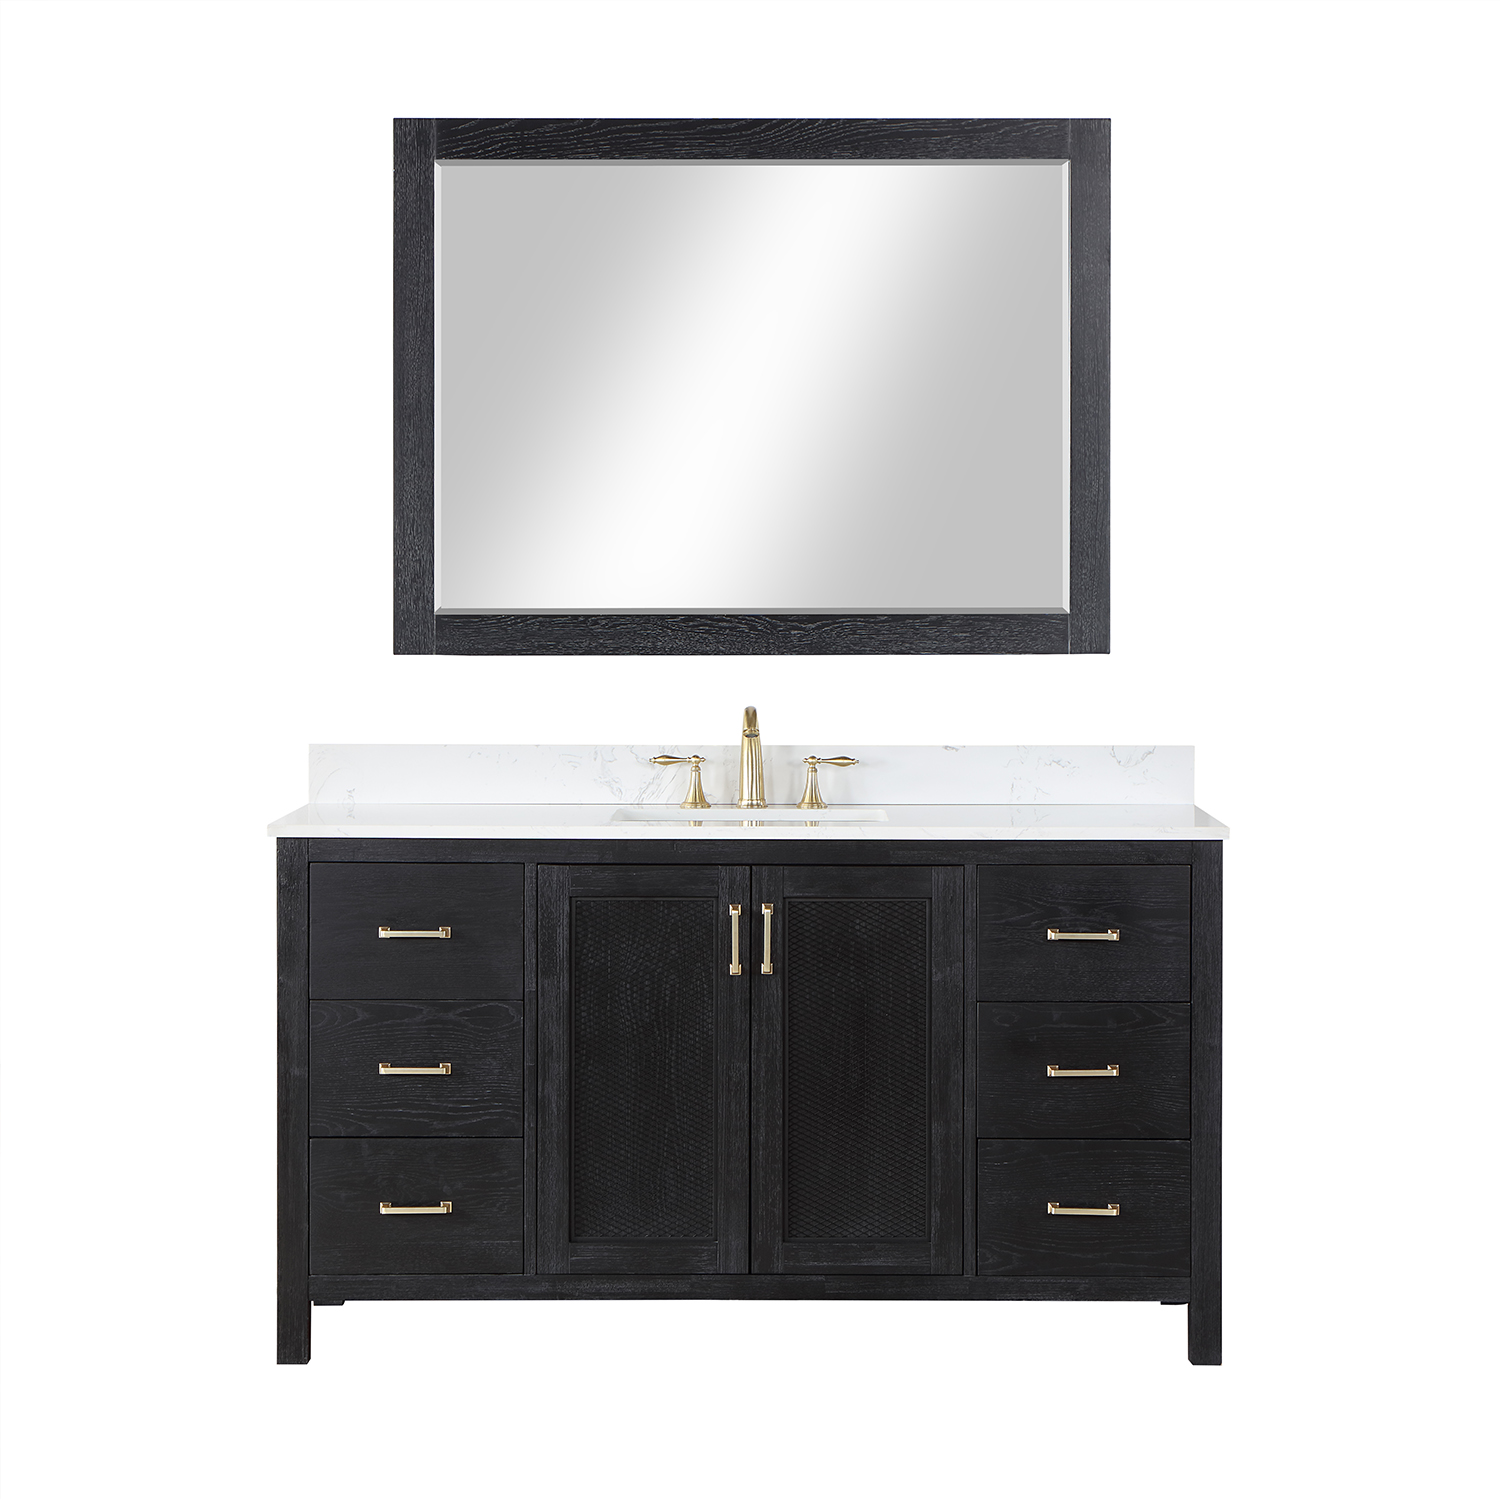 Issac Edwards Collection 60" Single Bathroom Vanity Set in Black Oak with Carrara White Composite Stone Countertop without Mirror 